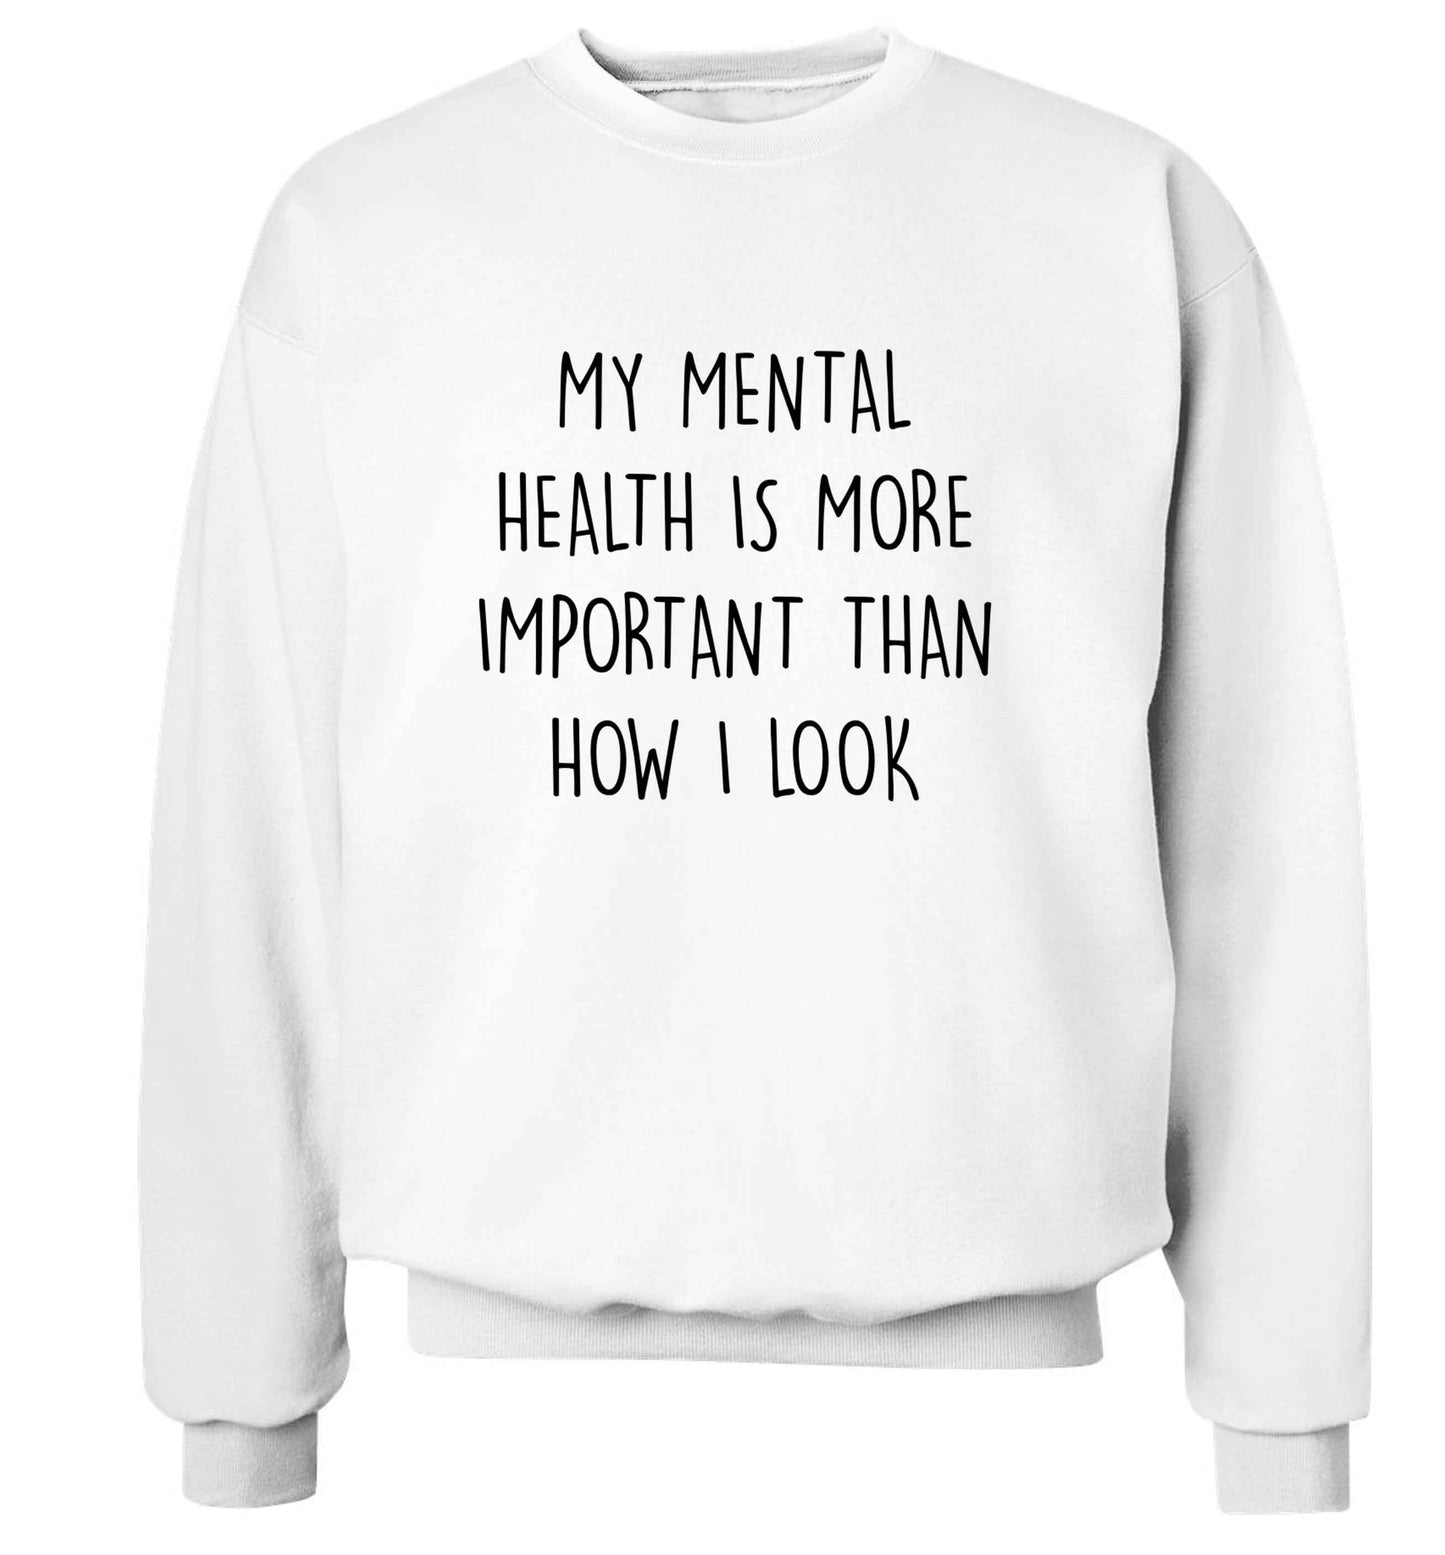 My mental health is more importnat than how I look adult's unisex white sweater 2XL